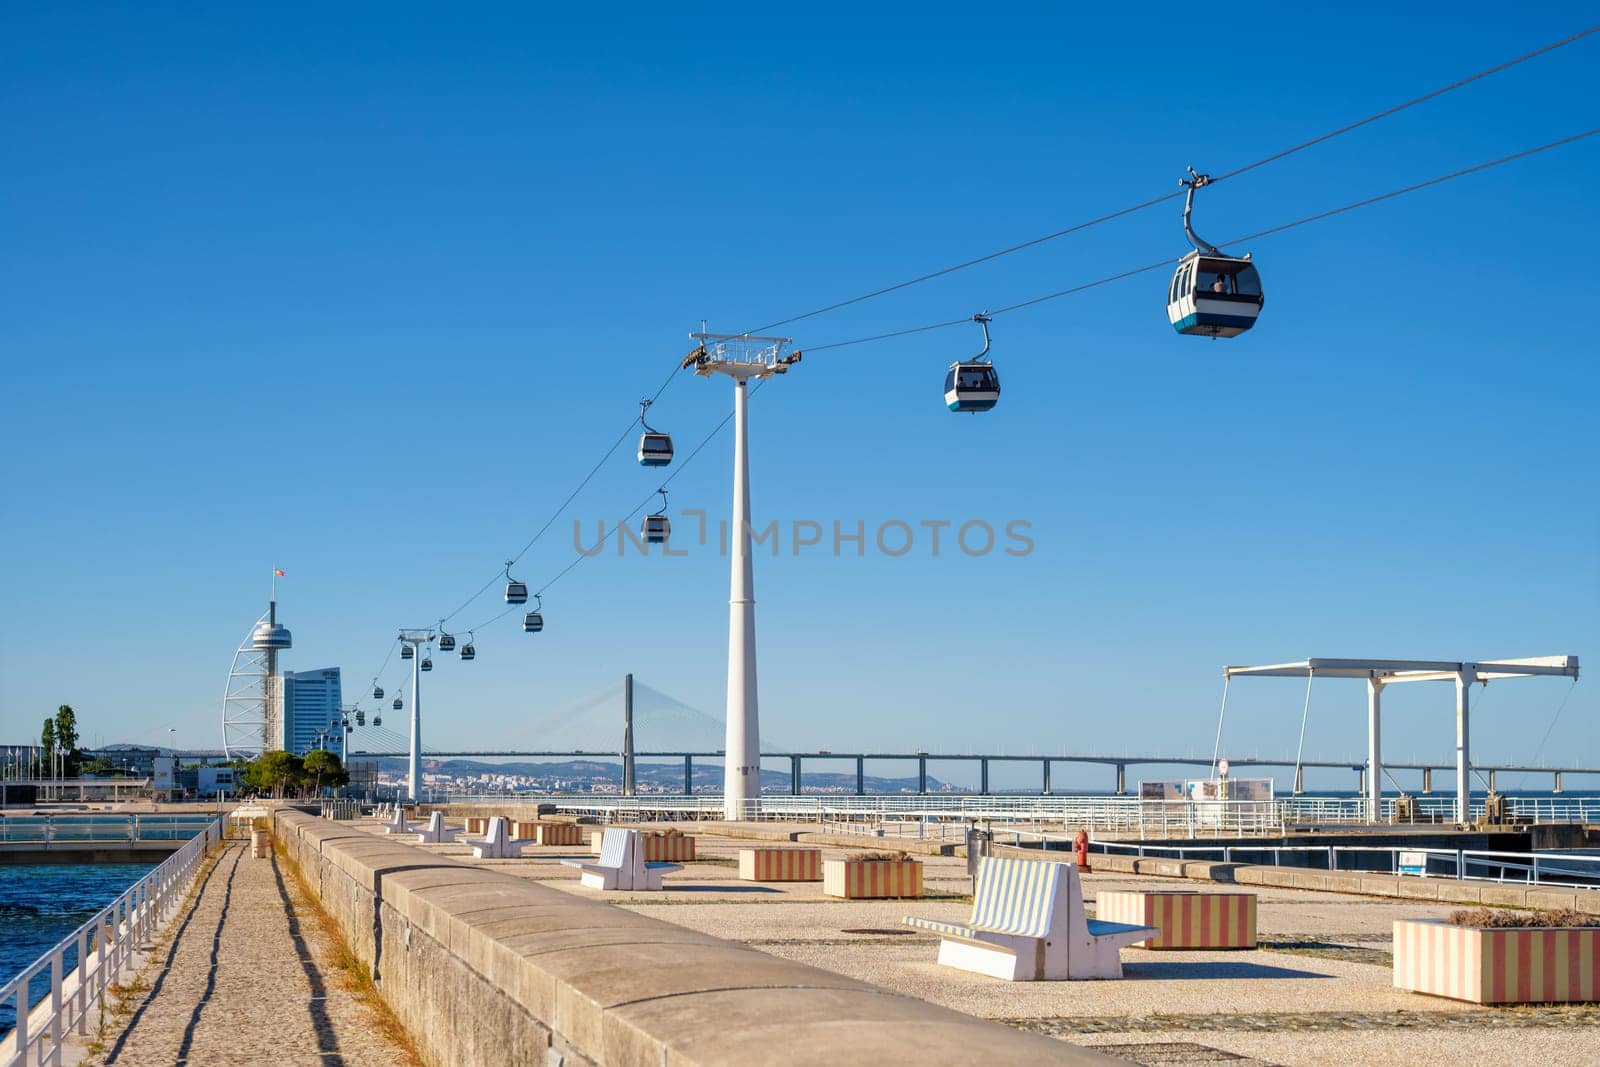 Telecabine Cable car in Lisbon, Portugal by dimol